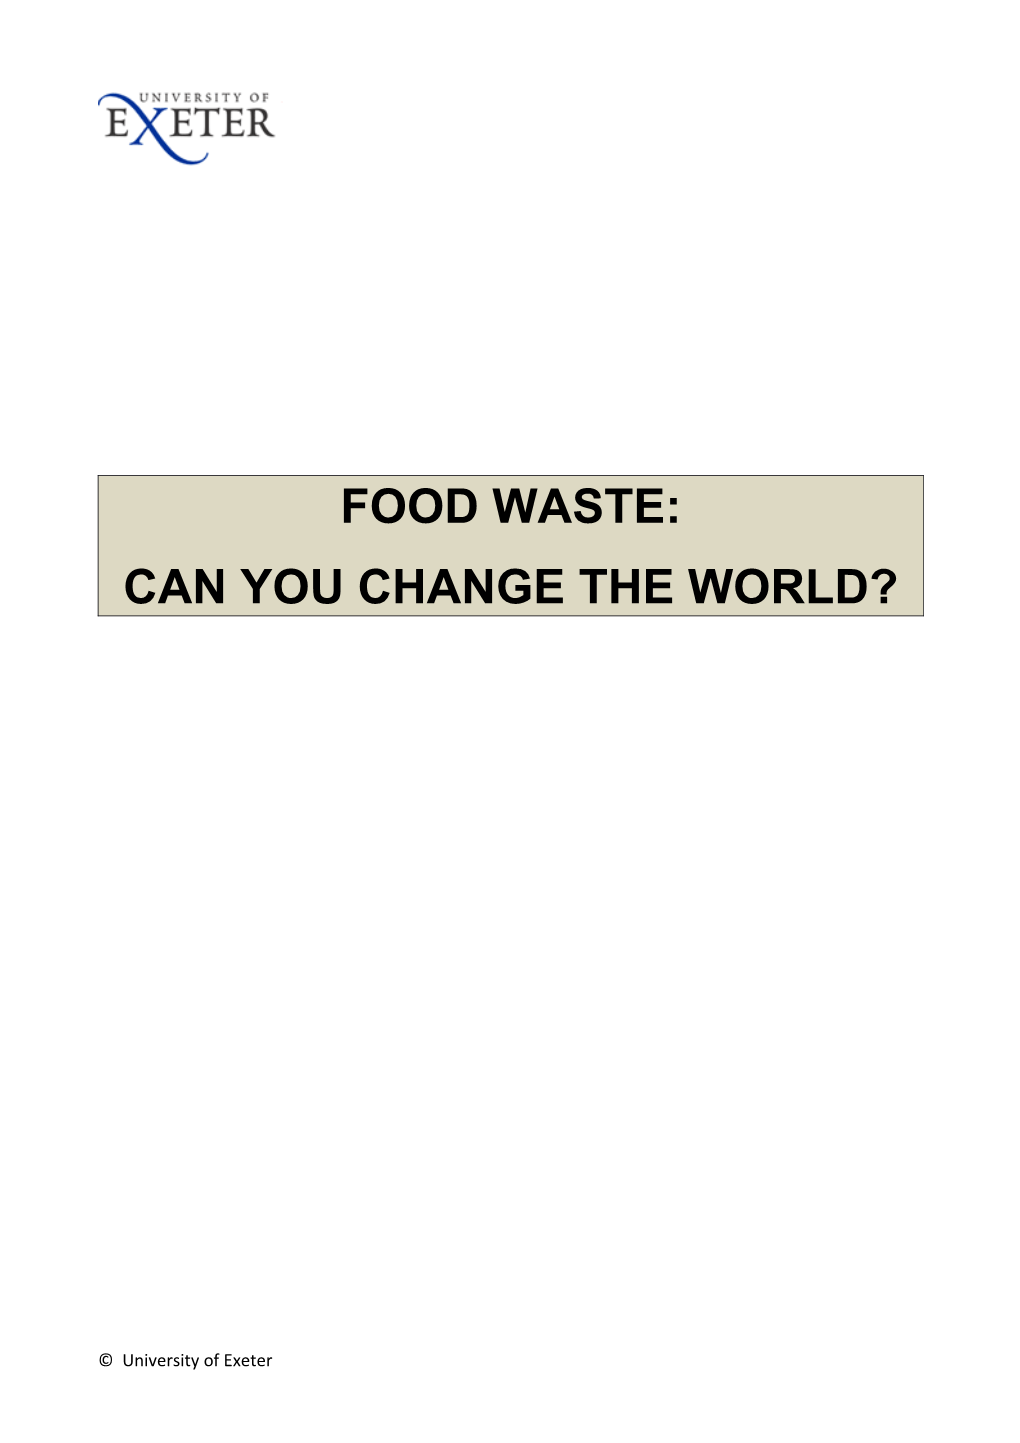 Can You Change the World?